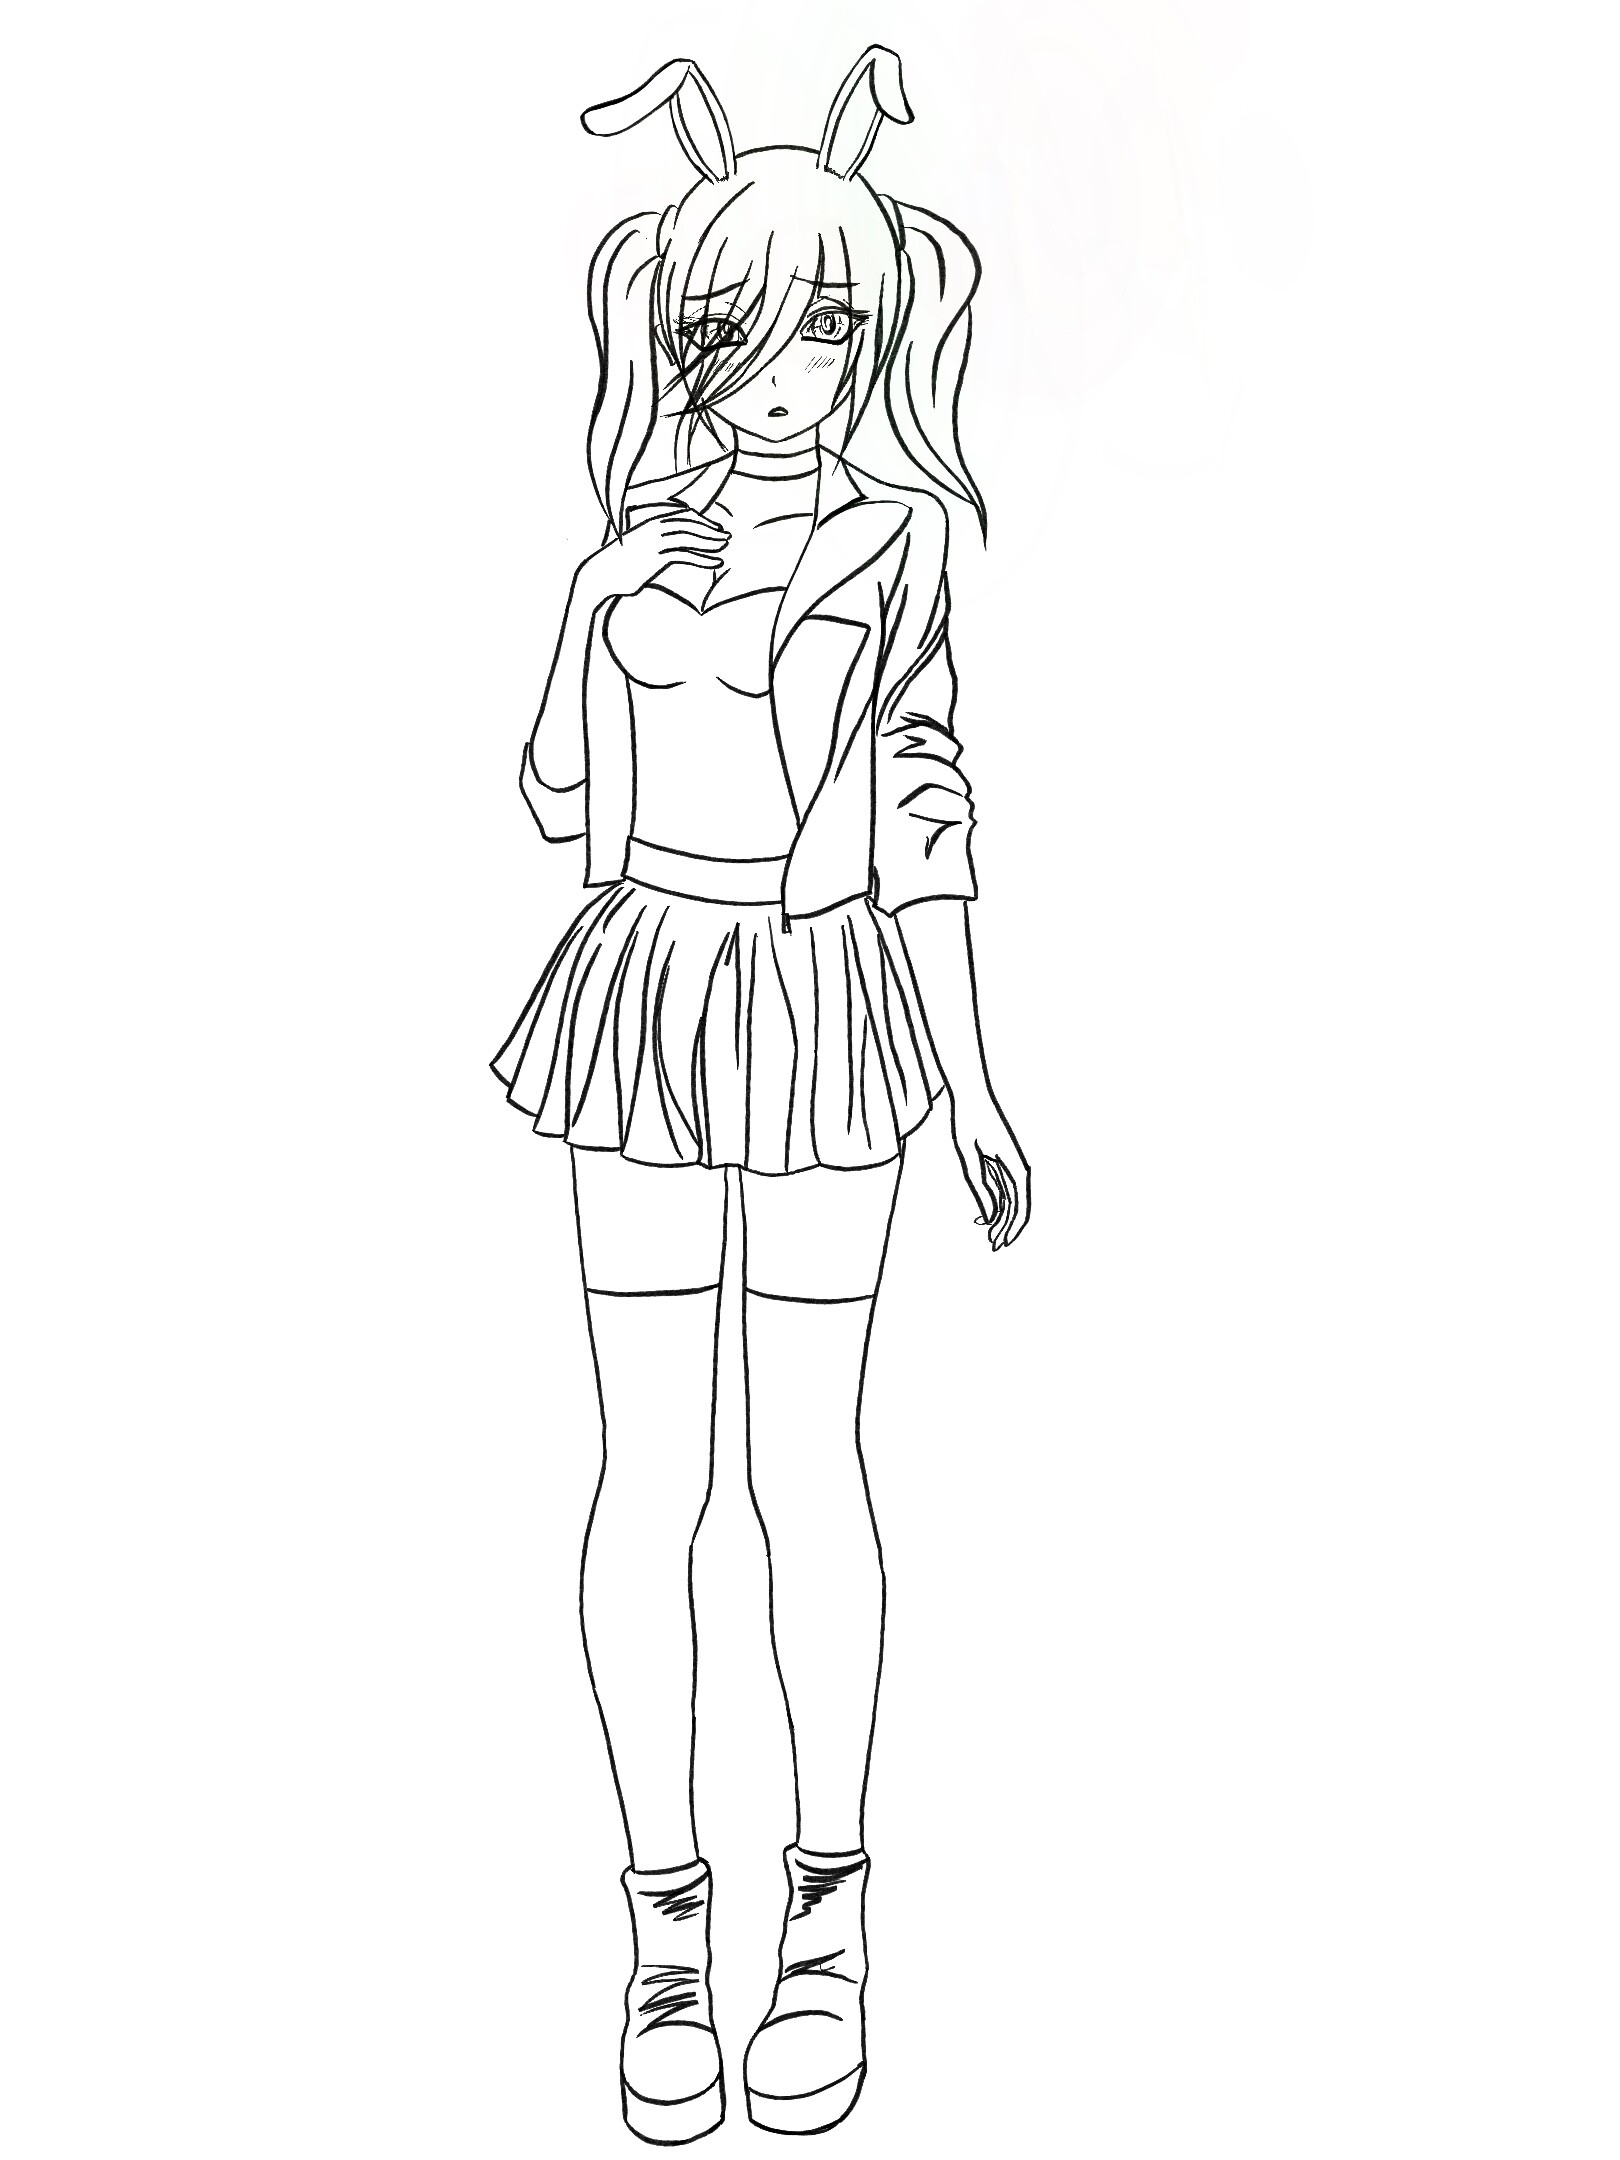 My Anime Drawing 2 No Color by maidenswing on DeviantArt